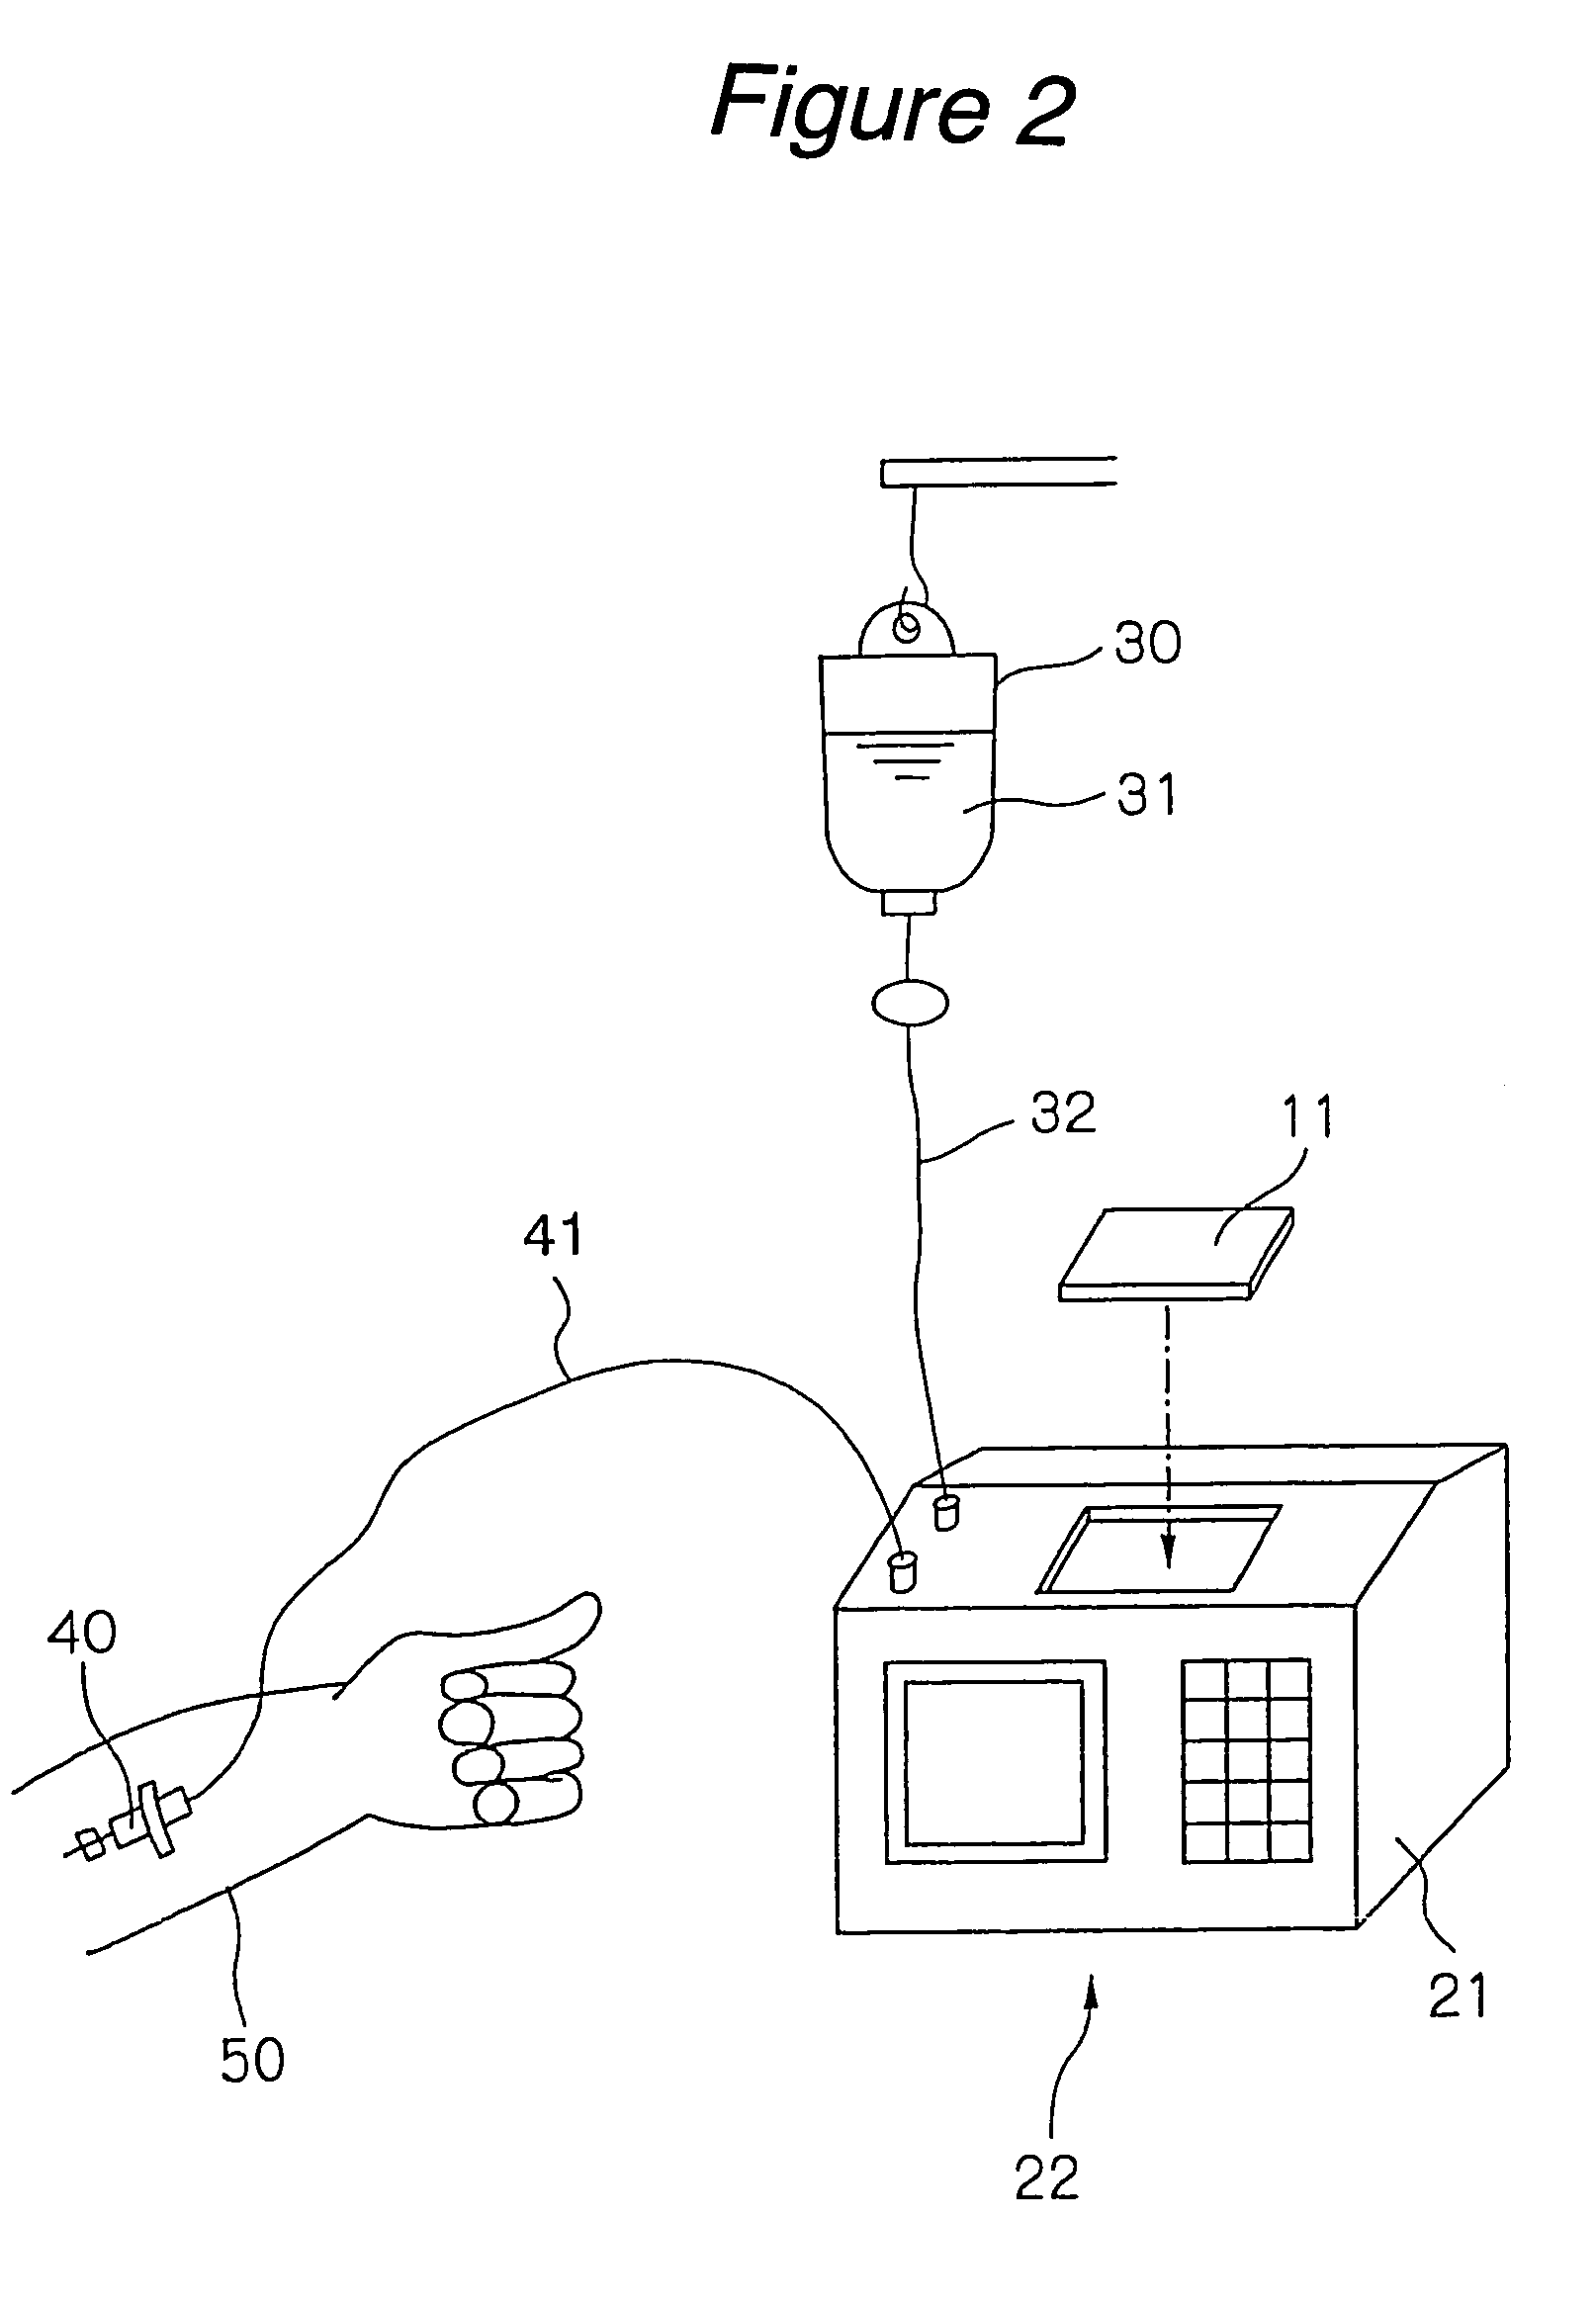 Motorized infusion injection system